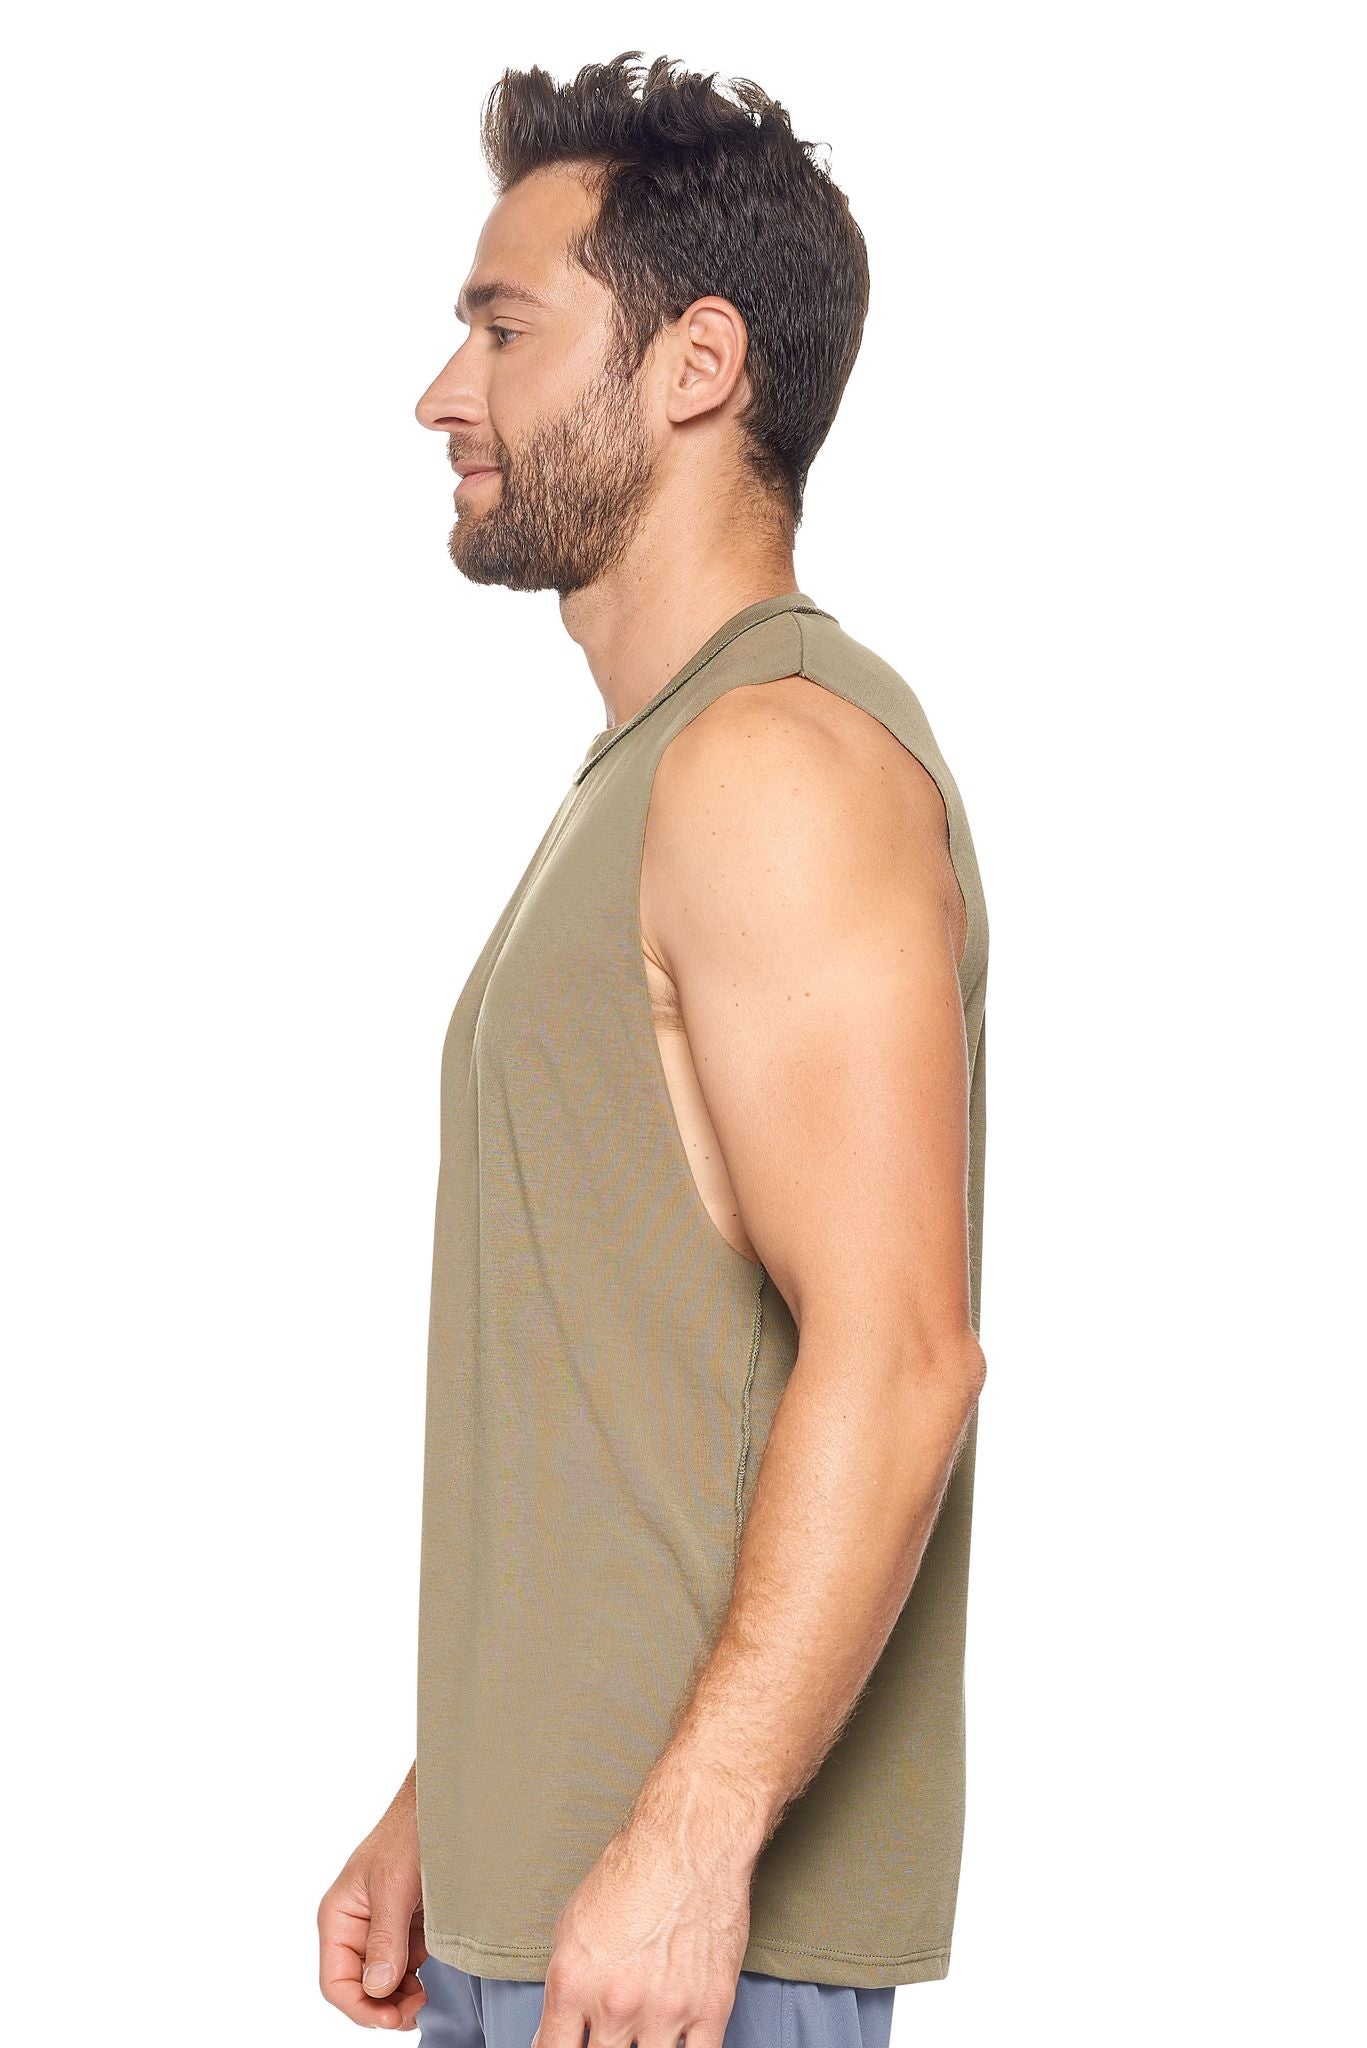 Siro™ Raw Edge Muscle Tee 🇺🇸 - Expert Brand Apparel#color_olive